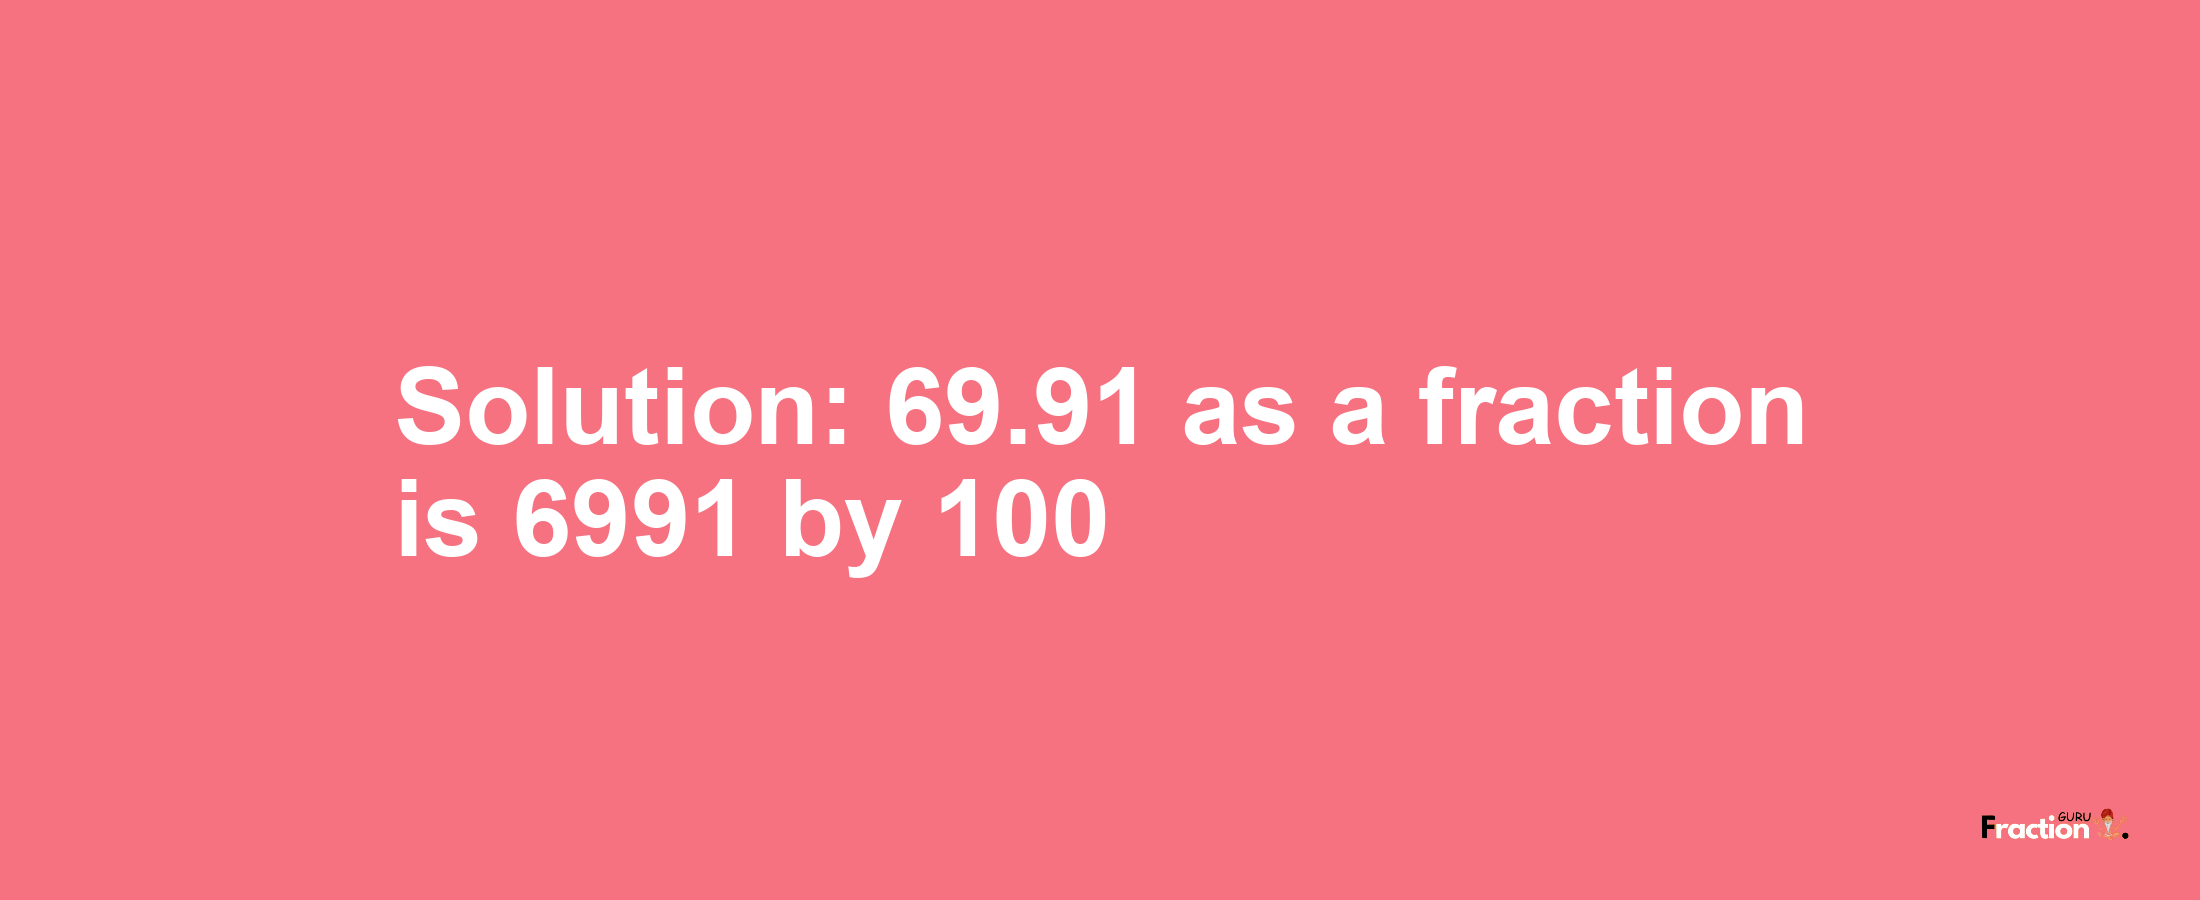 Solution:69.91 as a fraction is 6991/100